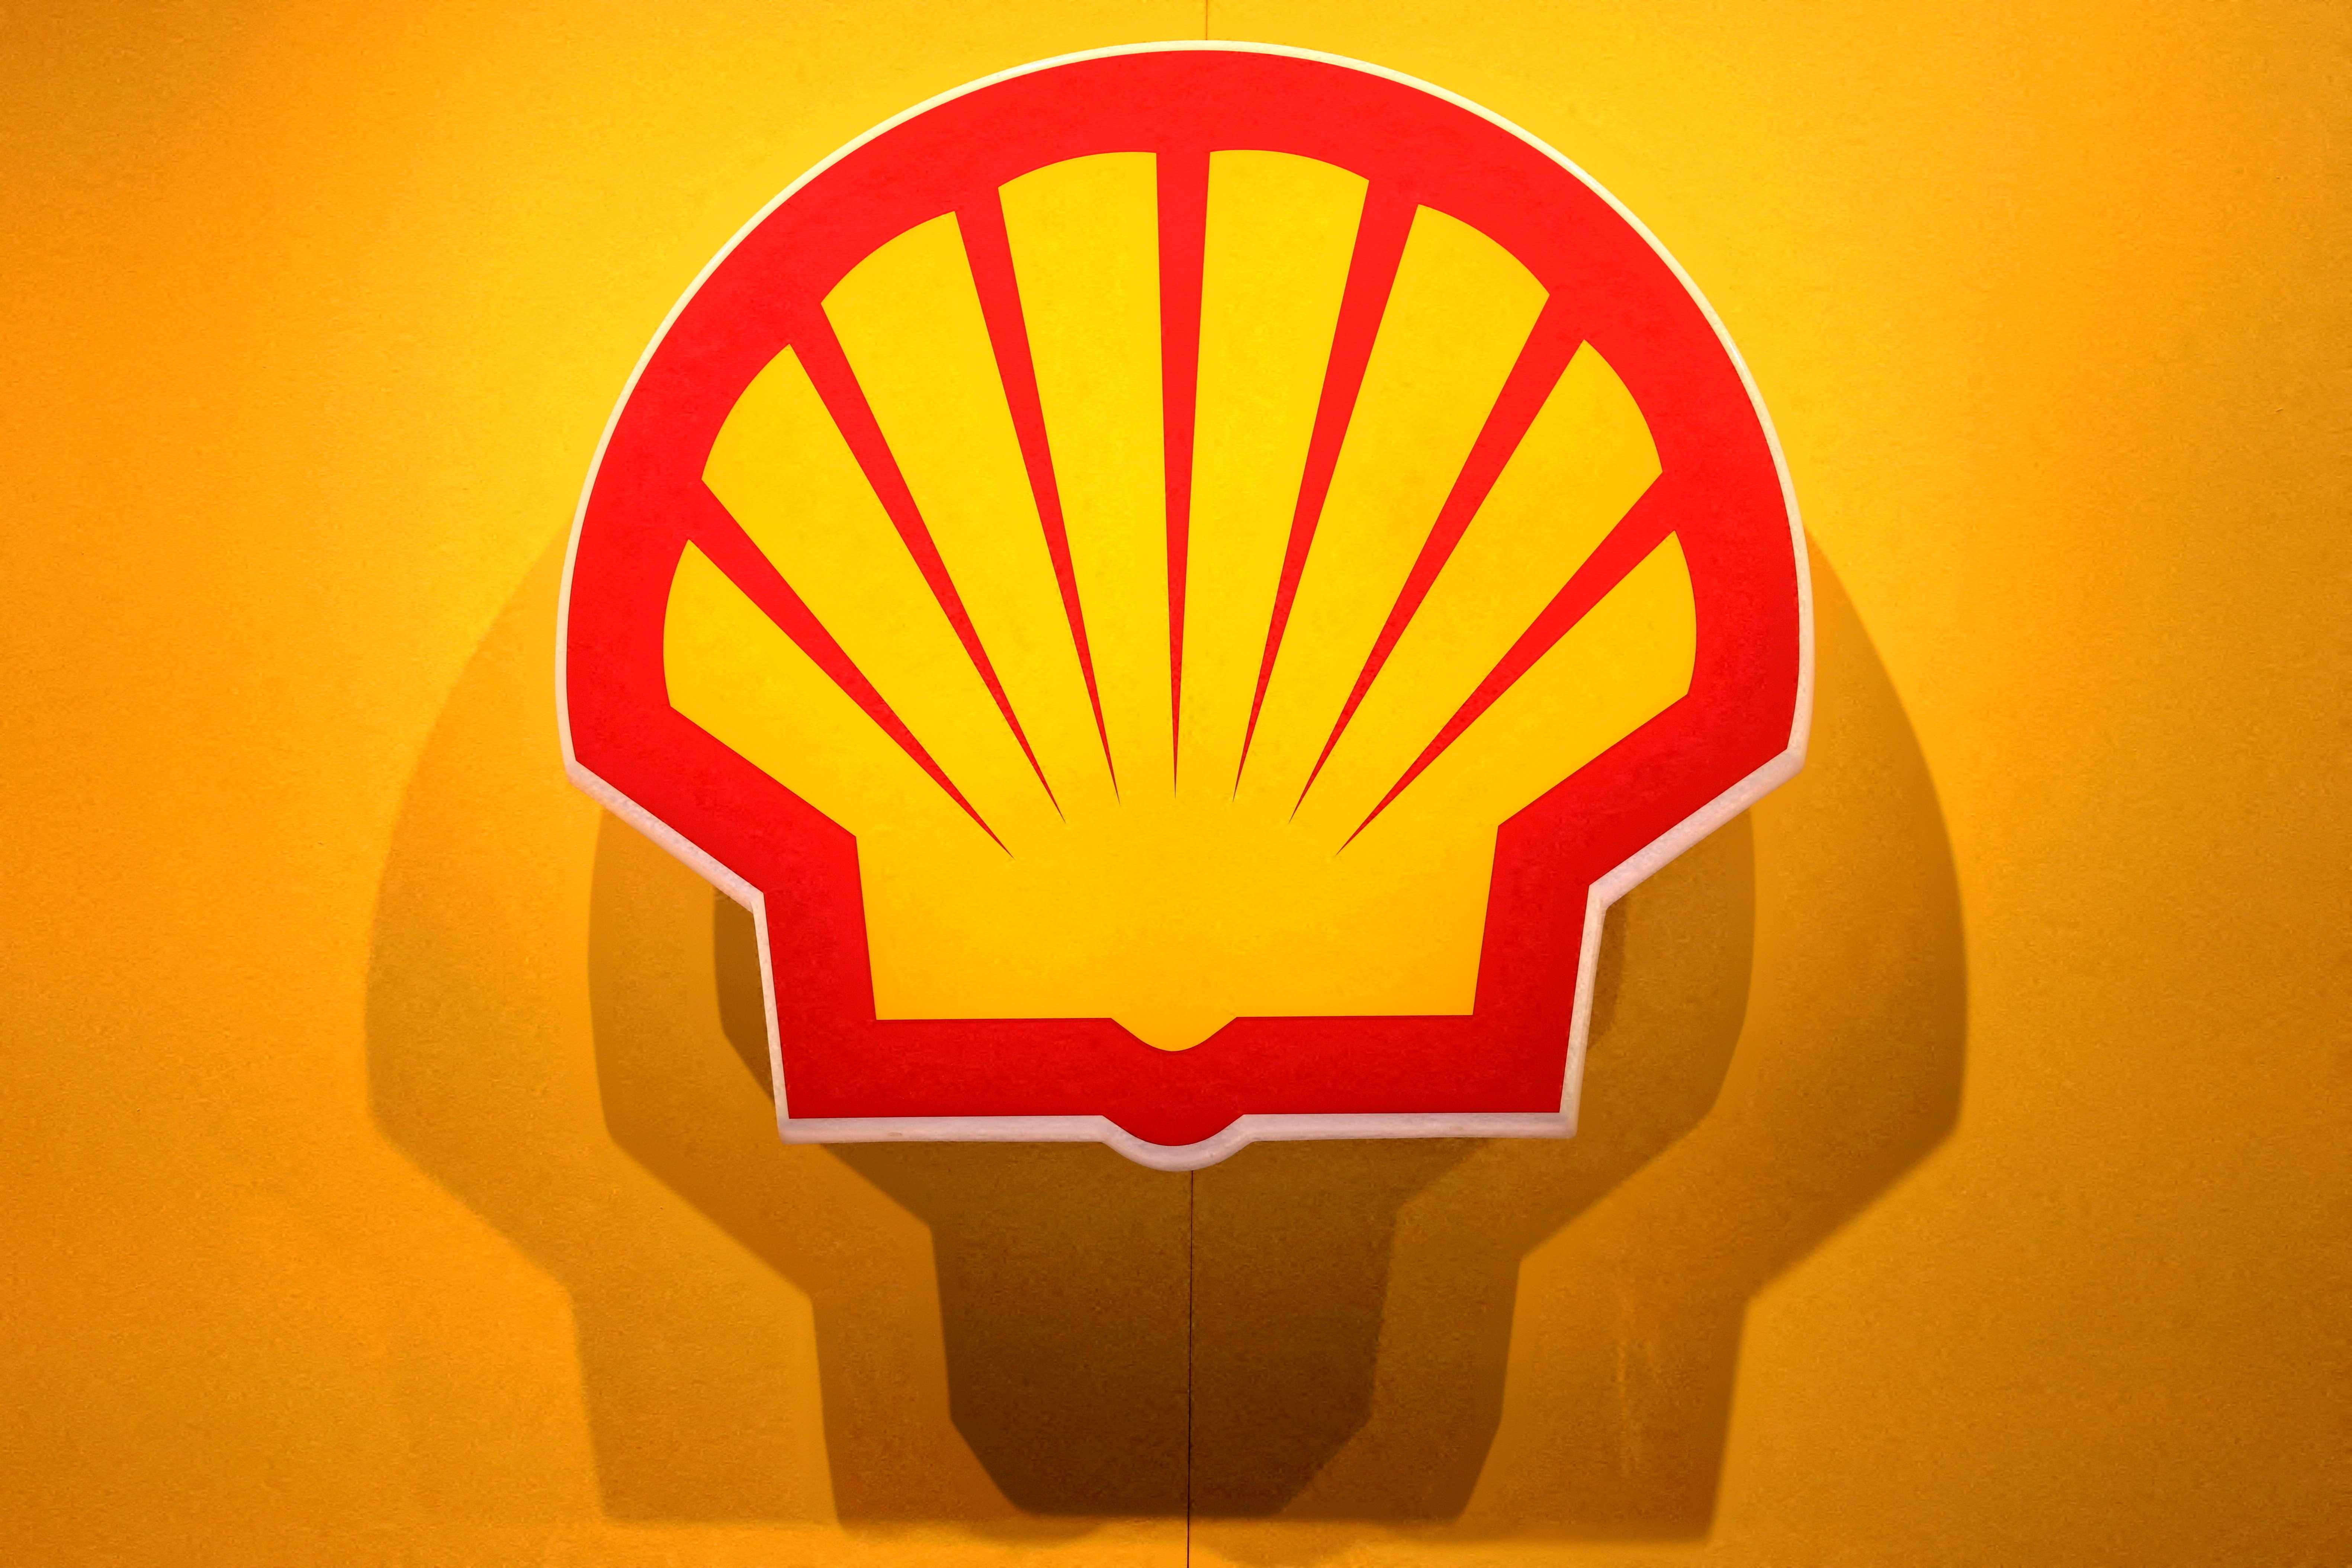 The logo of British multinational oil and gas company Shell